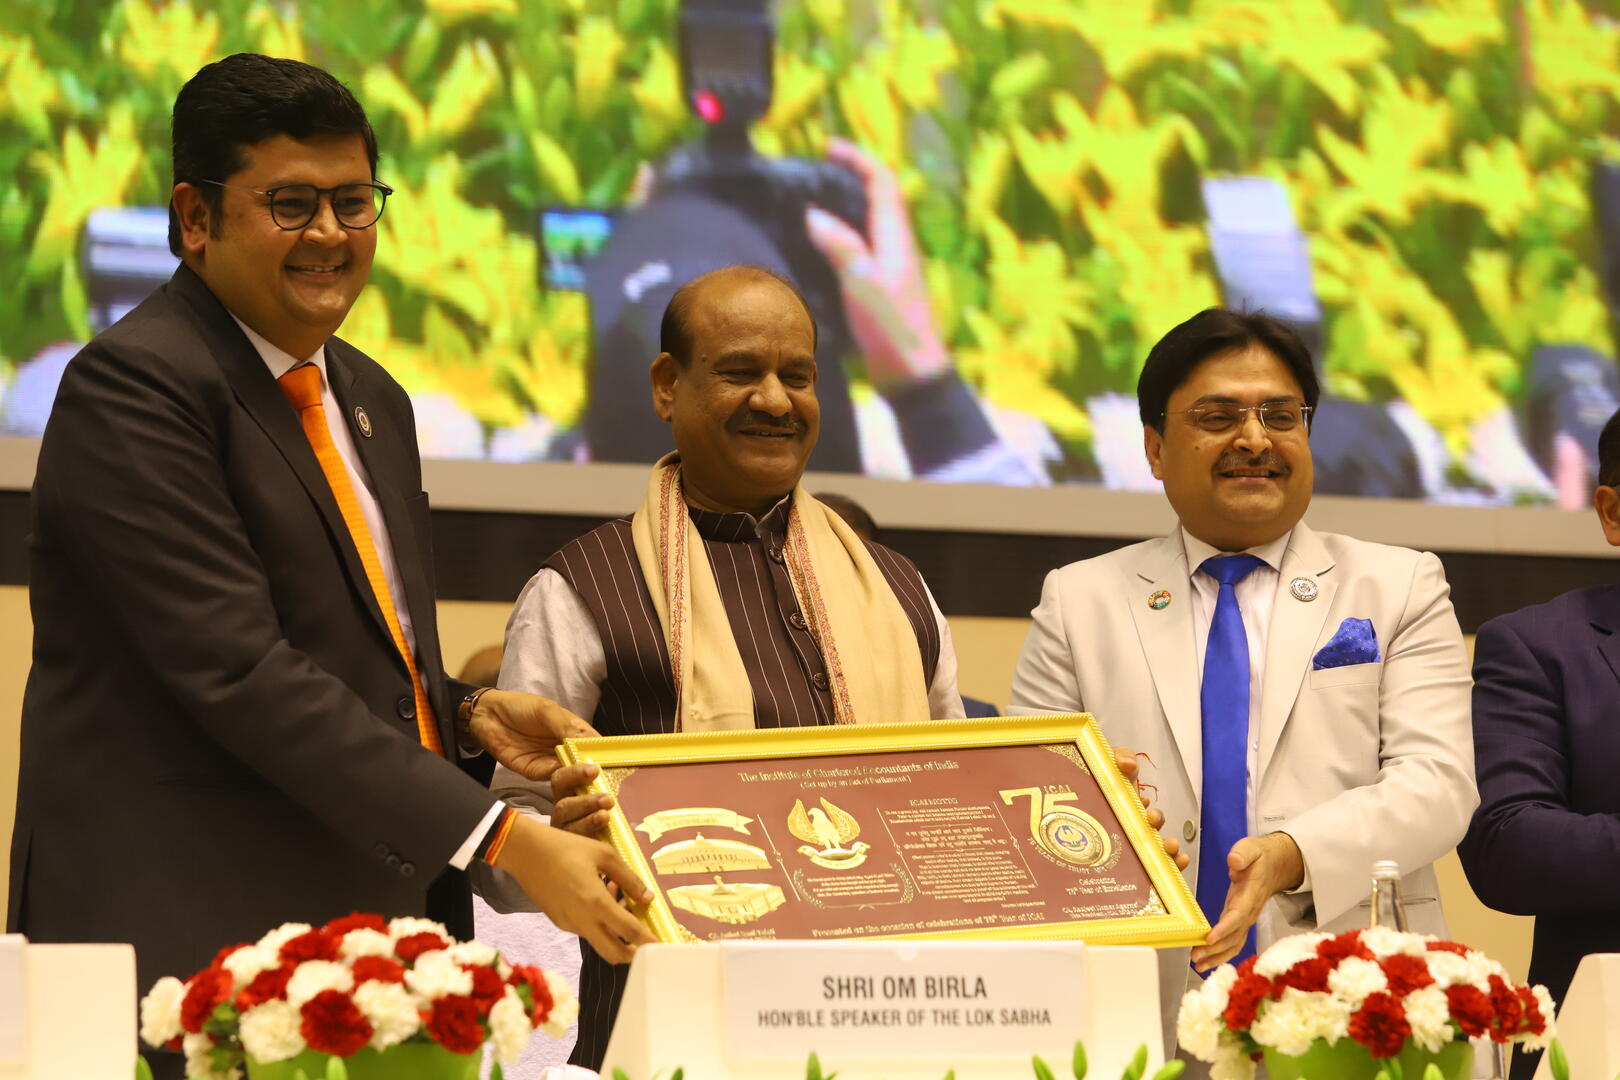 ICAI's Annual Function inaugurated by Chief Guest  Shri Om Birla, Hon’ble Speaker, Lok Sabha  Attended by 1500 Members